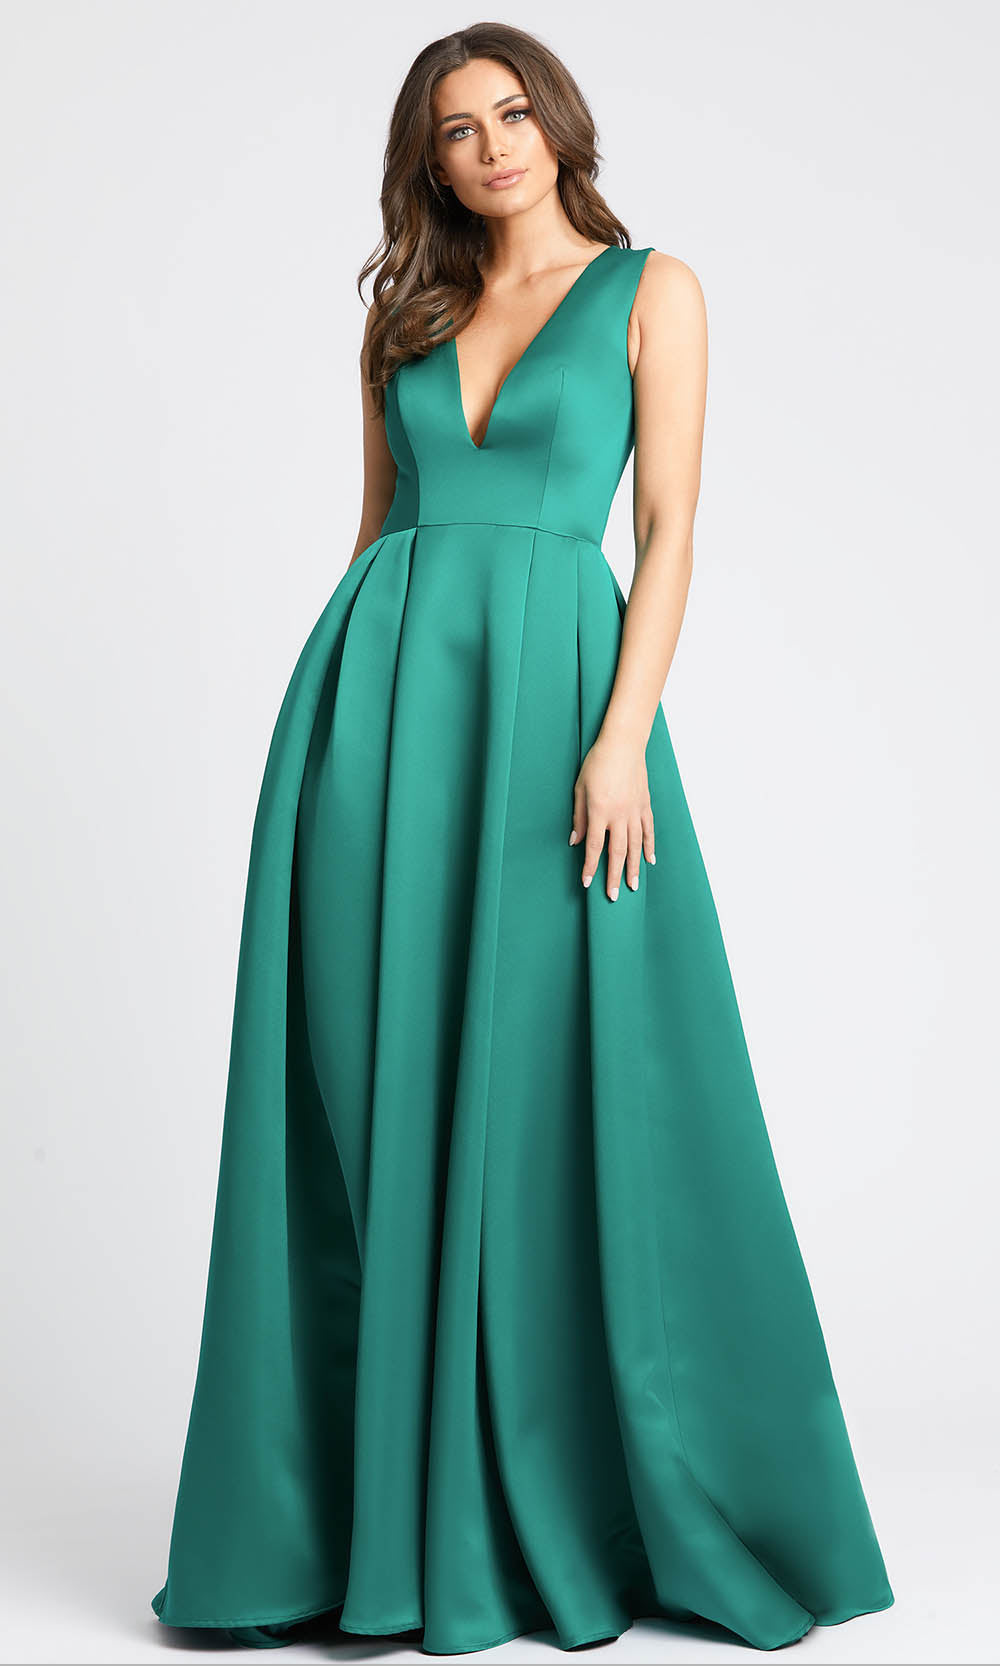 Ieena Duggal - 25953I Plunging V-Neck Pleated Skirt Evening Gown in Green Front